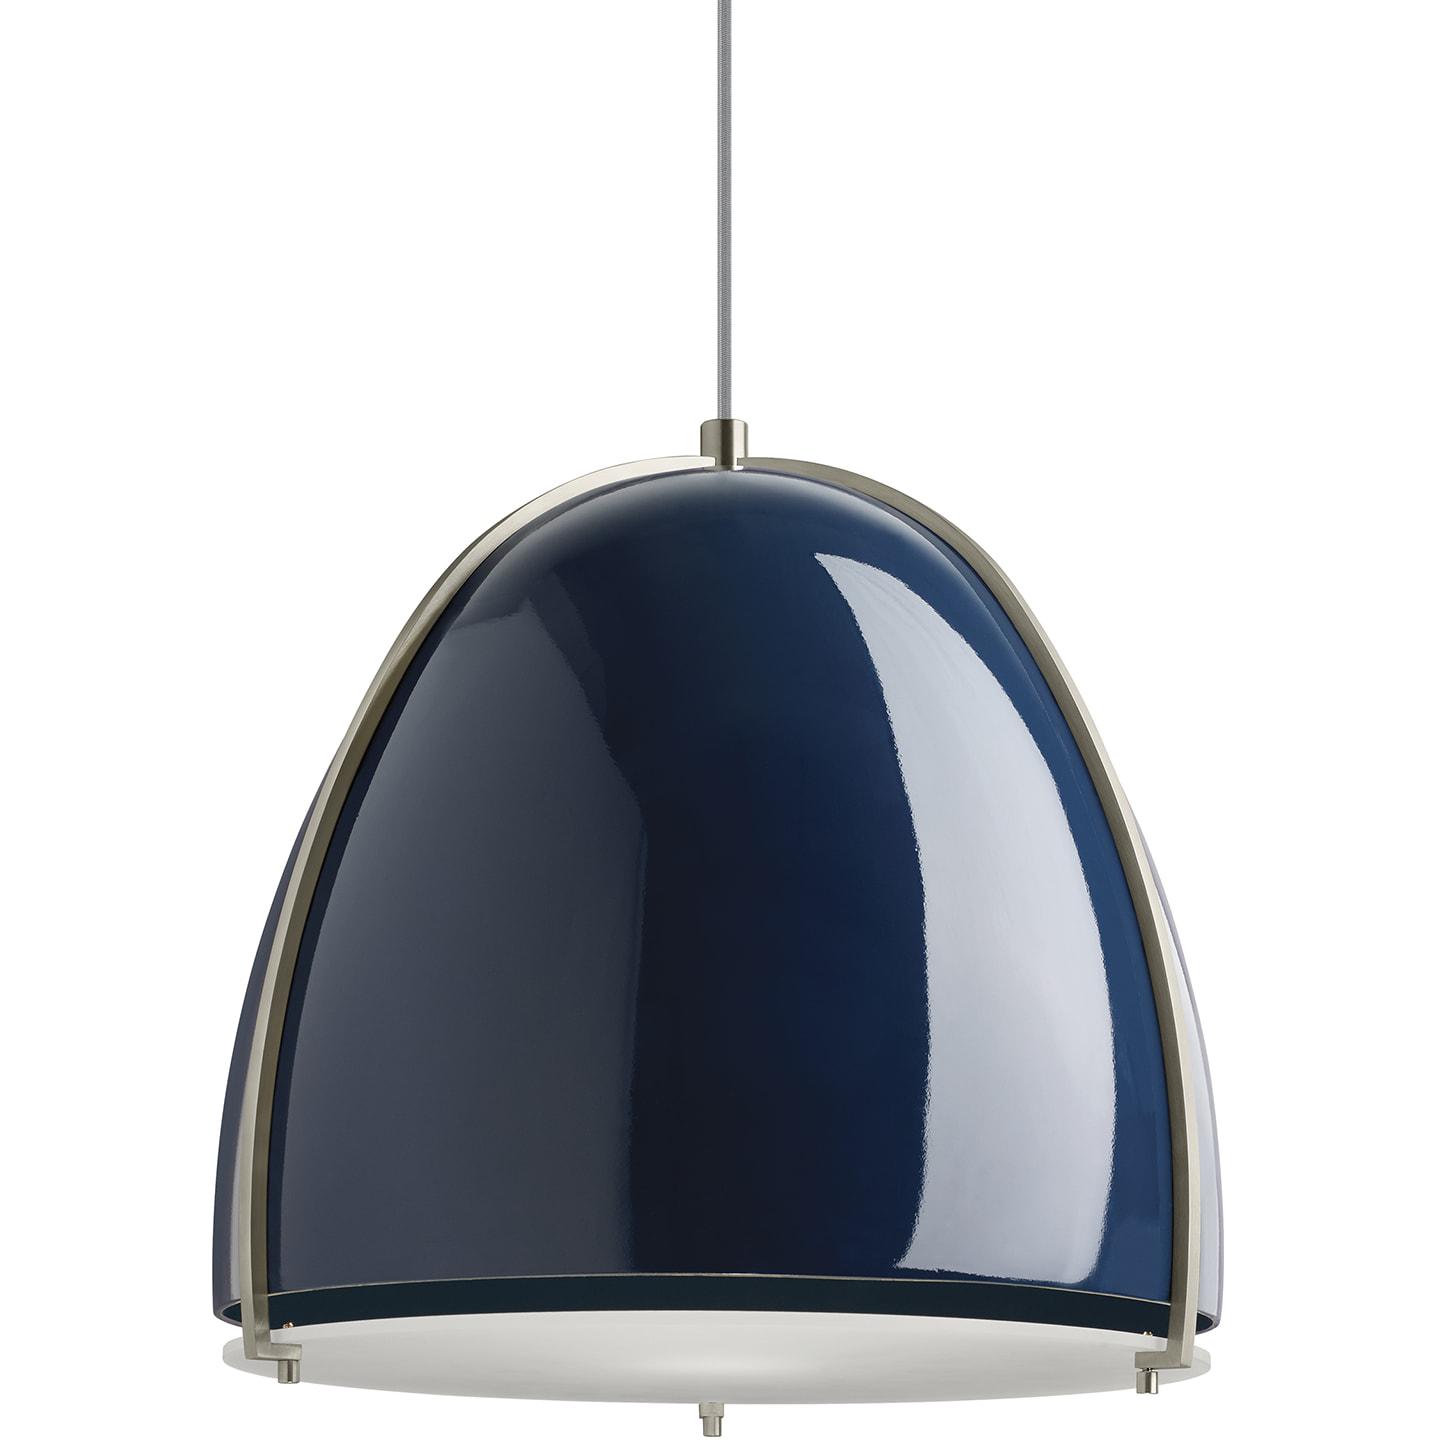 Blue/Satin Nickel Lamp Not Included